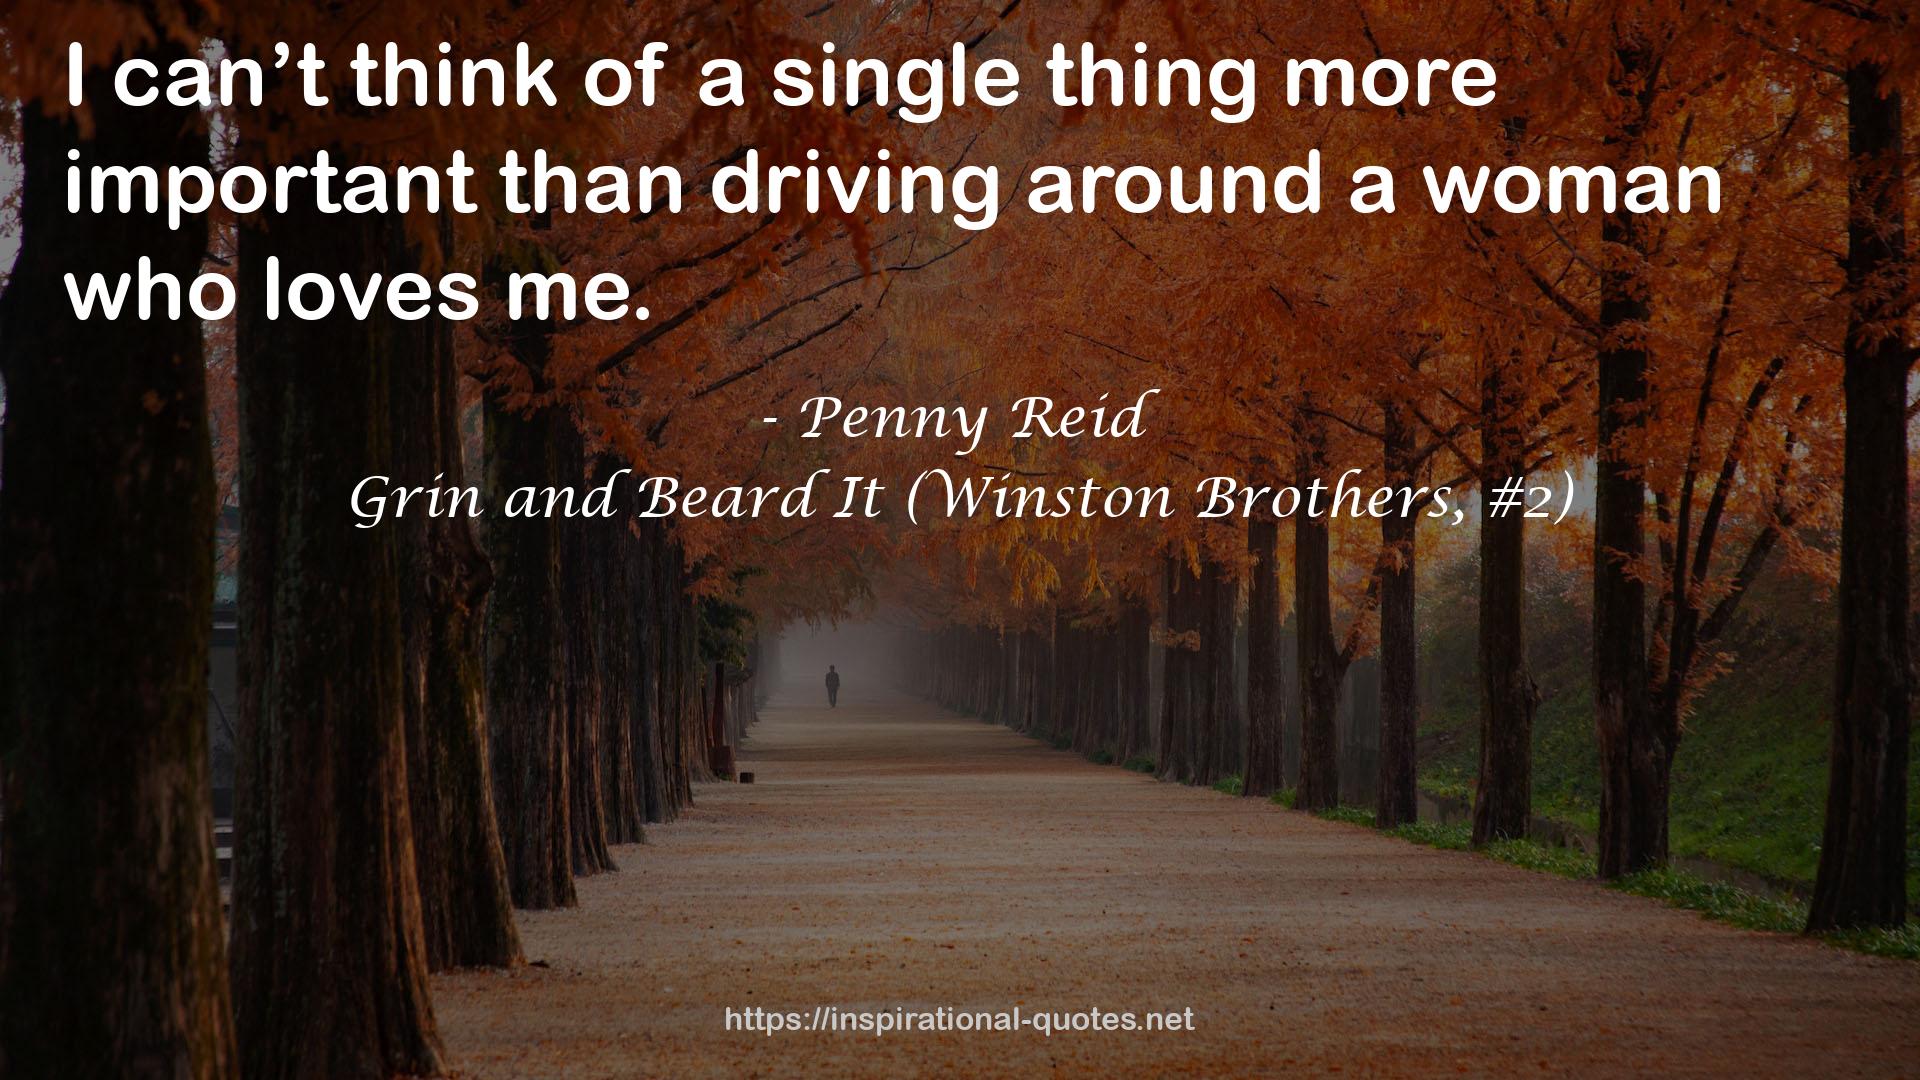 Grin and Beard It (Winston Brothers, #2) QUOTES